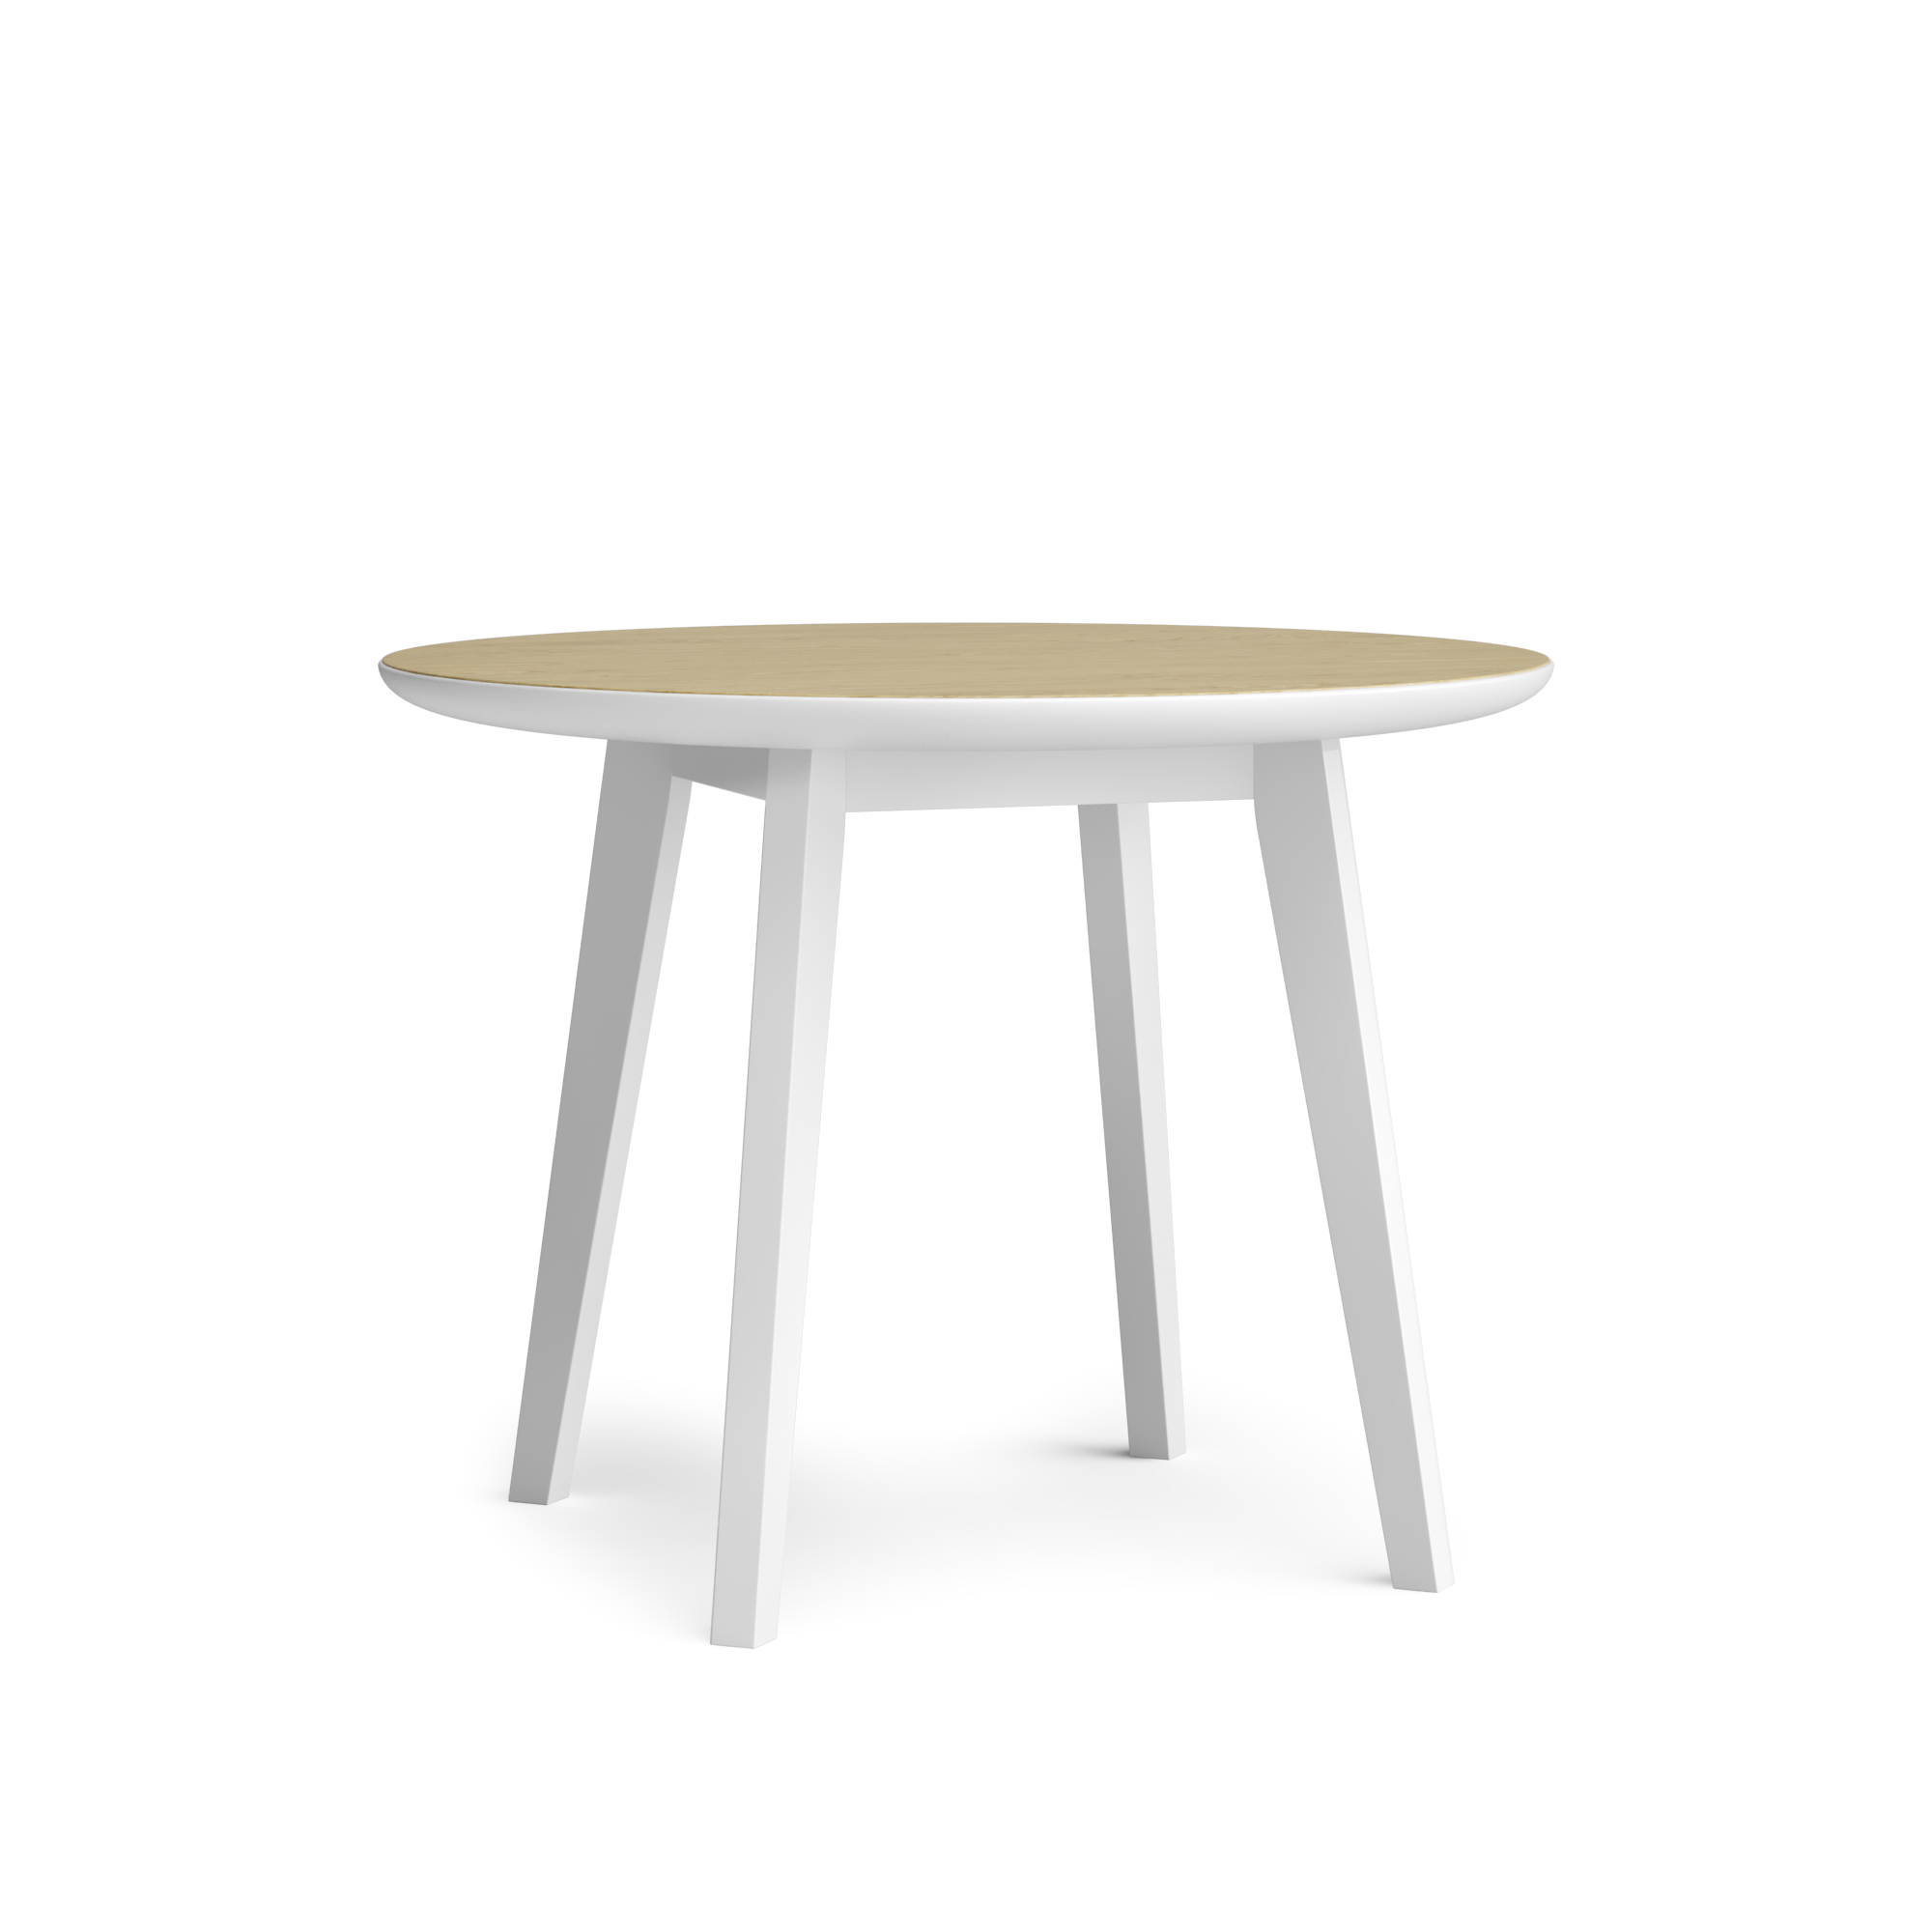 Pixal Dining Table Round